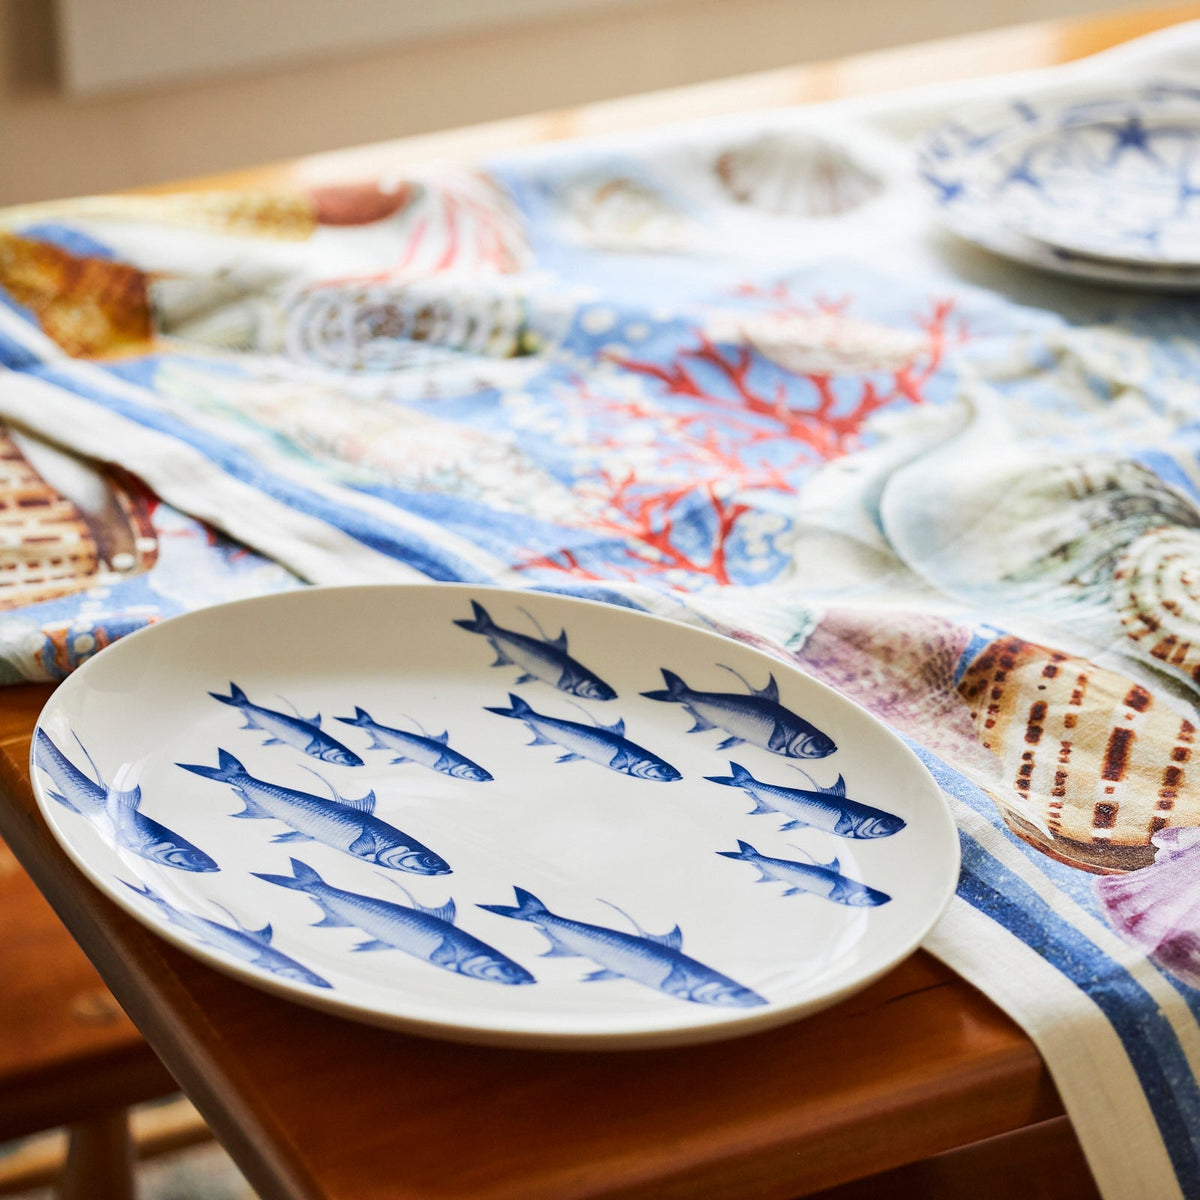 A Caskata Artisanal Home School of Fish Coupe Oval Platter sits on a table.